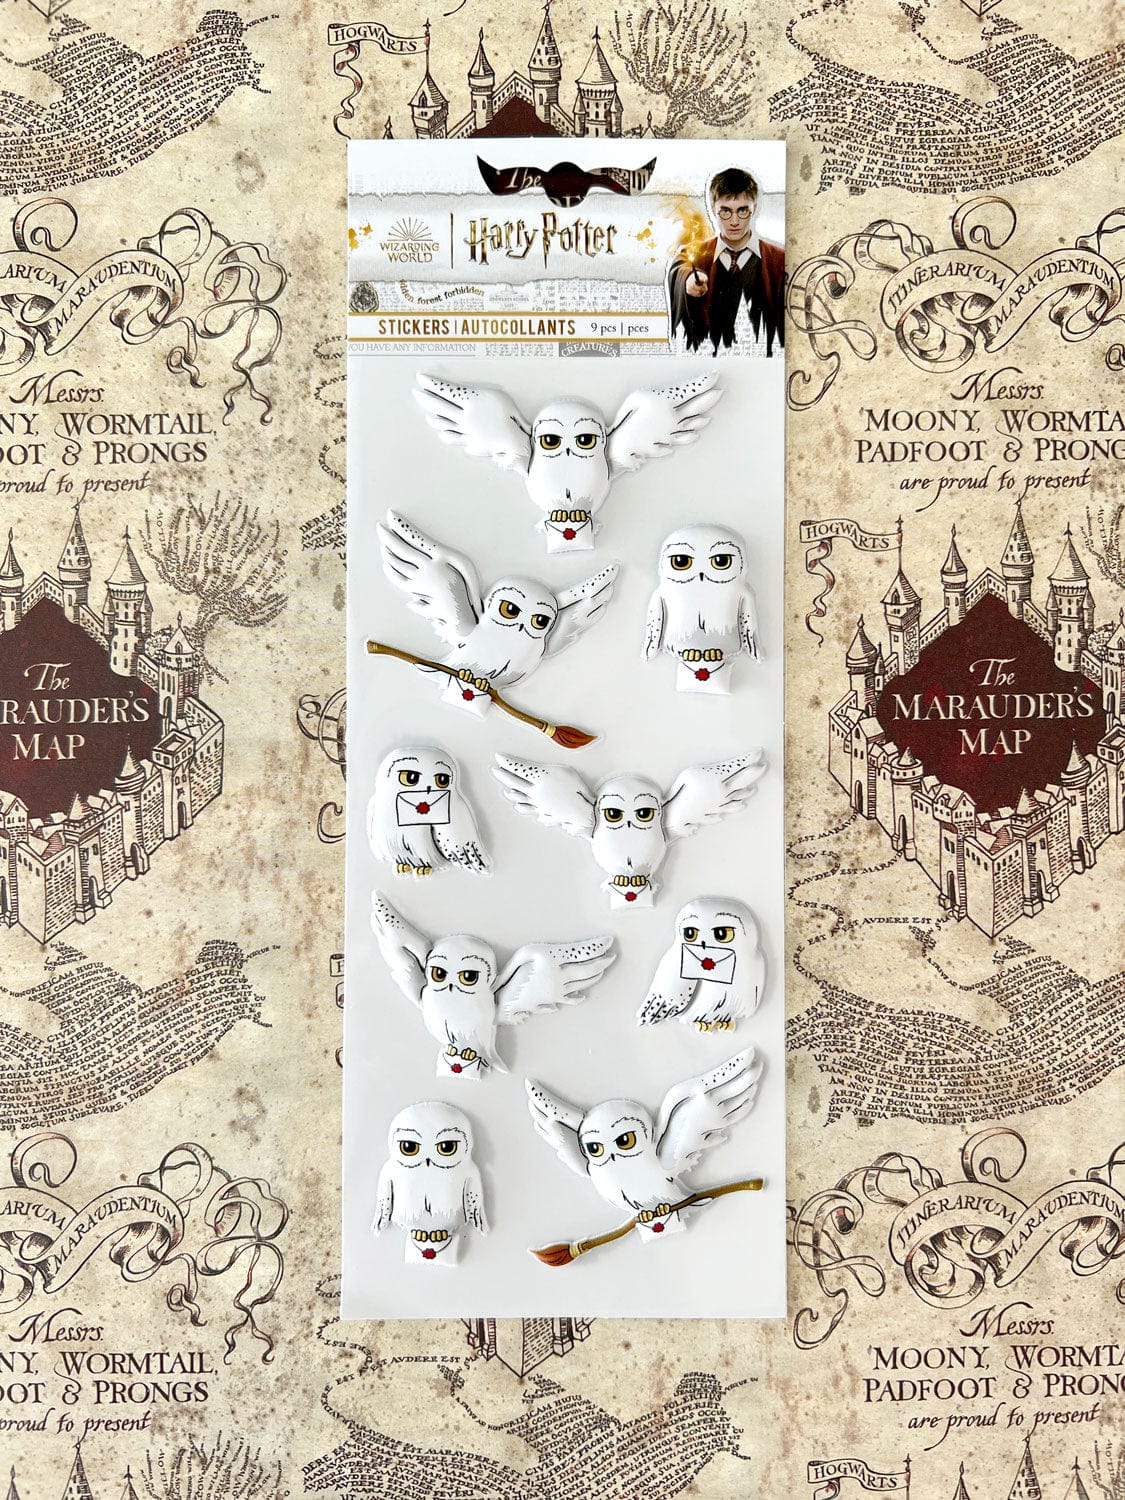 Harry Potter Hedwig Puffy Stickers